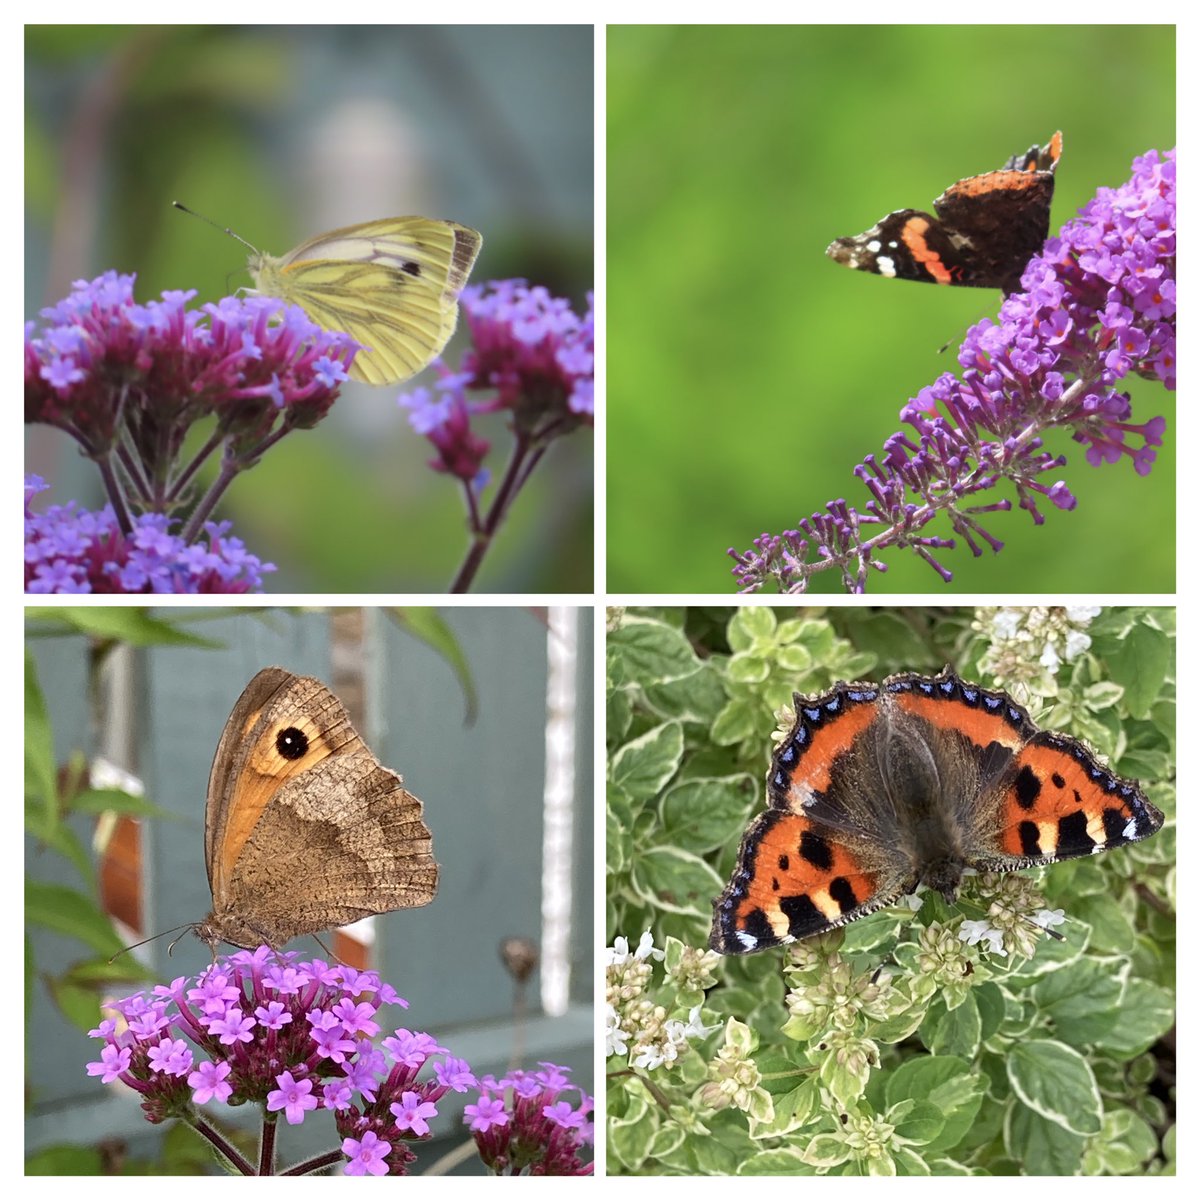 Easily distracted from gardening work this week by the butterfly visitors . Top attractions seem to be verbena, oregano and buddleia   #GardensHour #gardensoftwitter